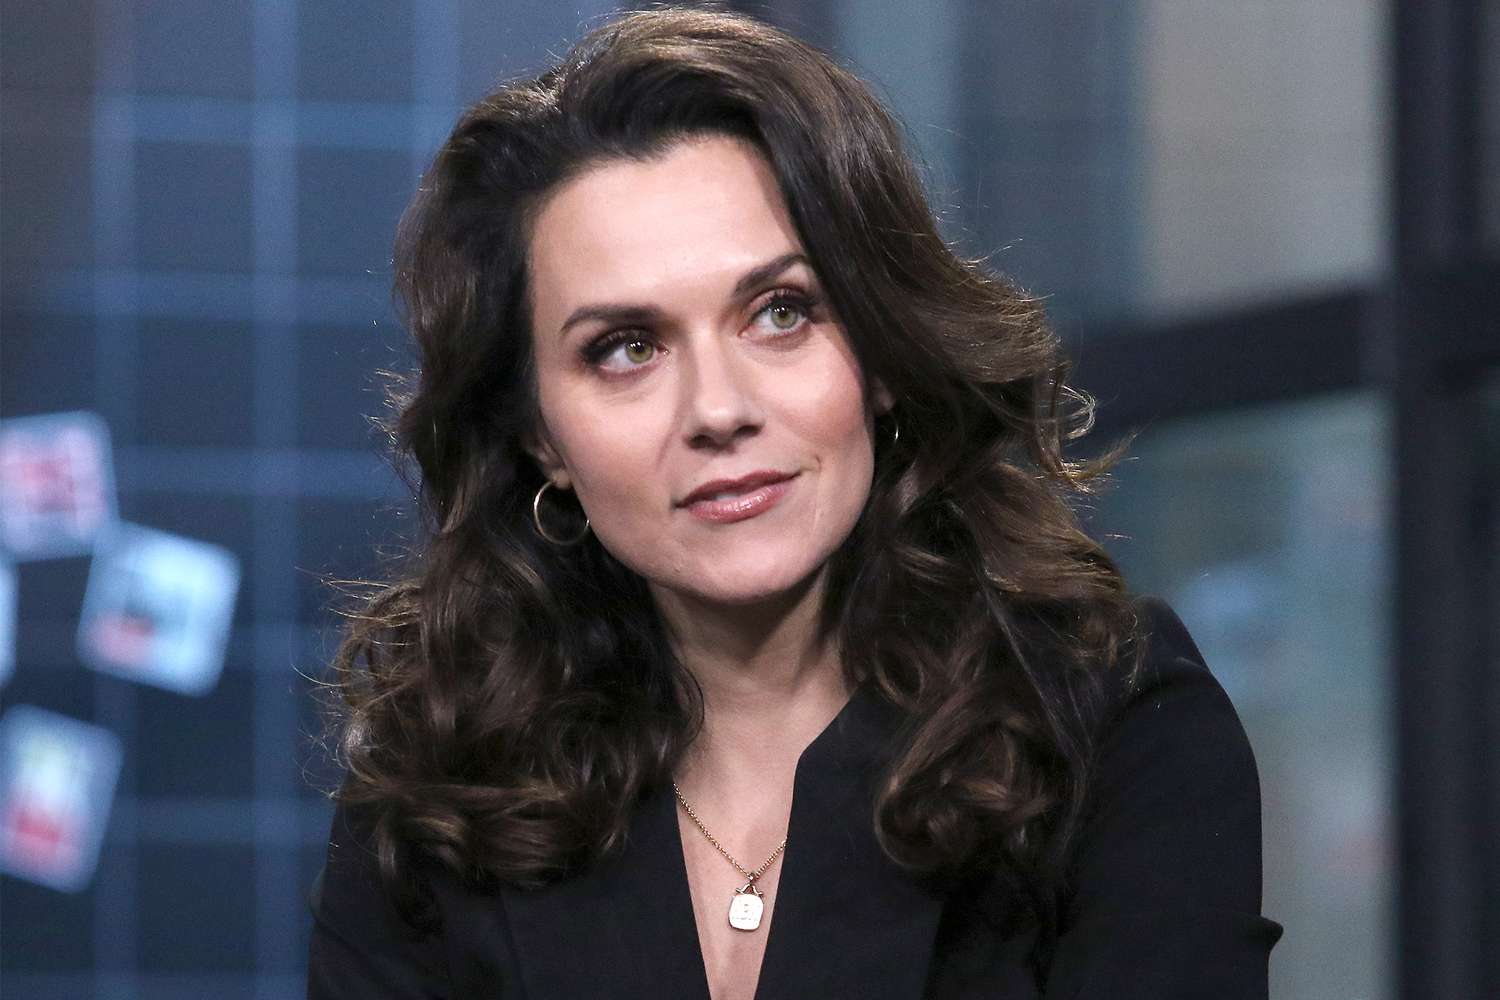 Hilarie Burton shares powerful story of having abortion after pregnancy loss